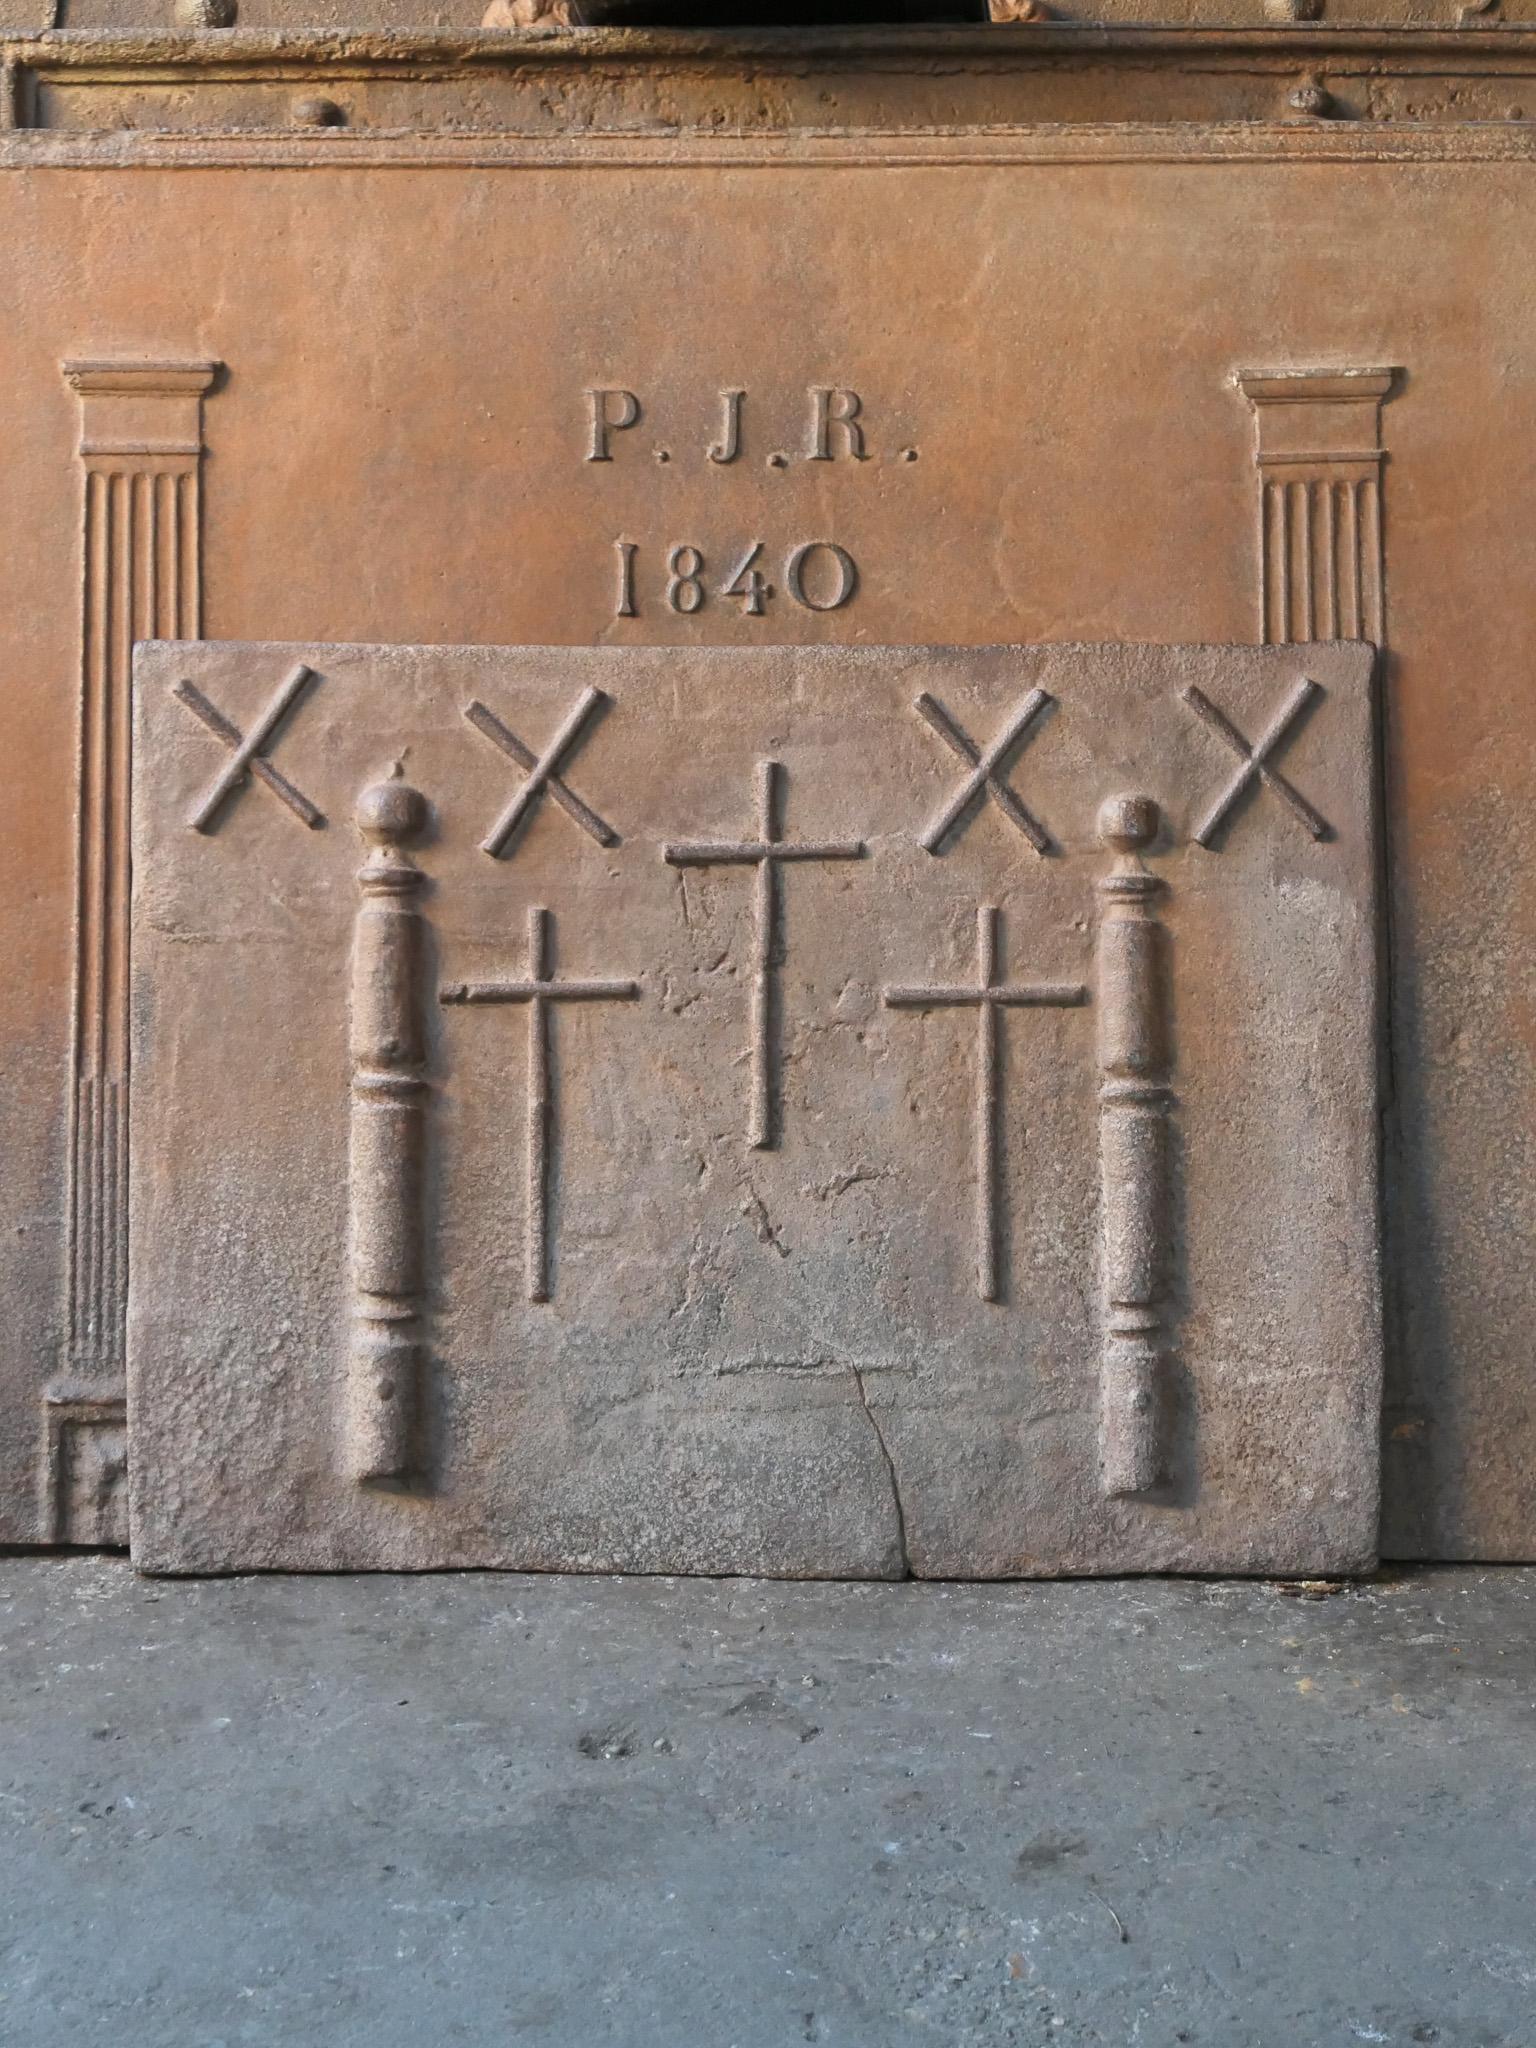 17th-18th century French fireback with four Saint Andrew's crosses and two pillars of Hercules. Saint Andrew is said to have been martyred on a cross in this shape. The cross is since then a sign for humility and sacrifice. The pillars of Hercules